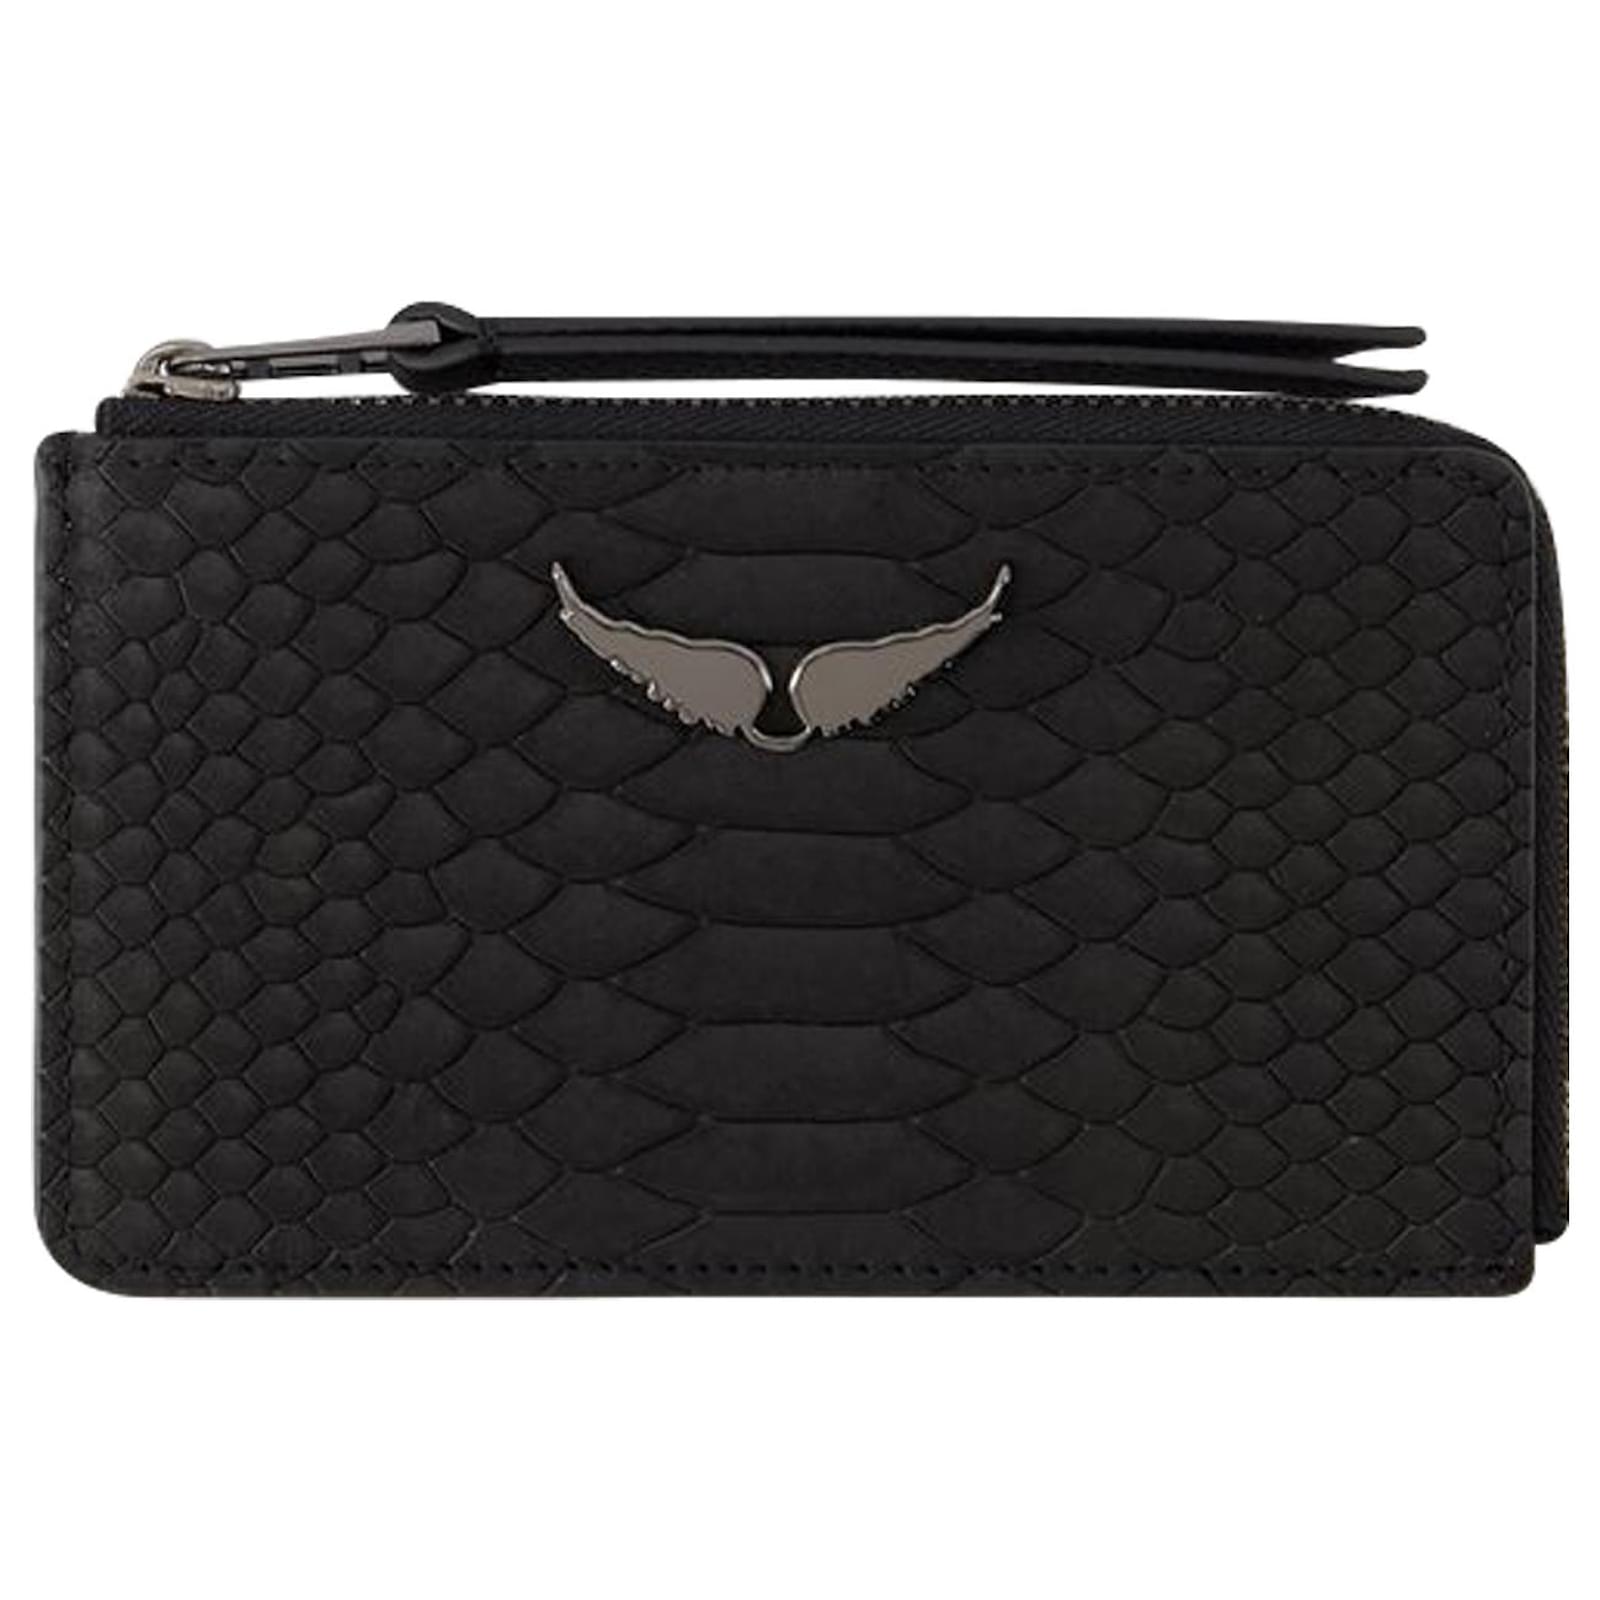 ZADIG&VOLTAIRE - Leather mini wallet